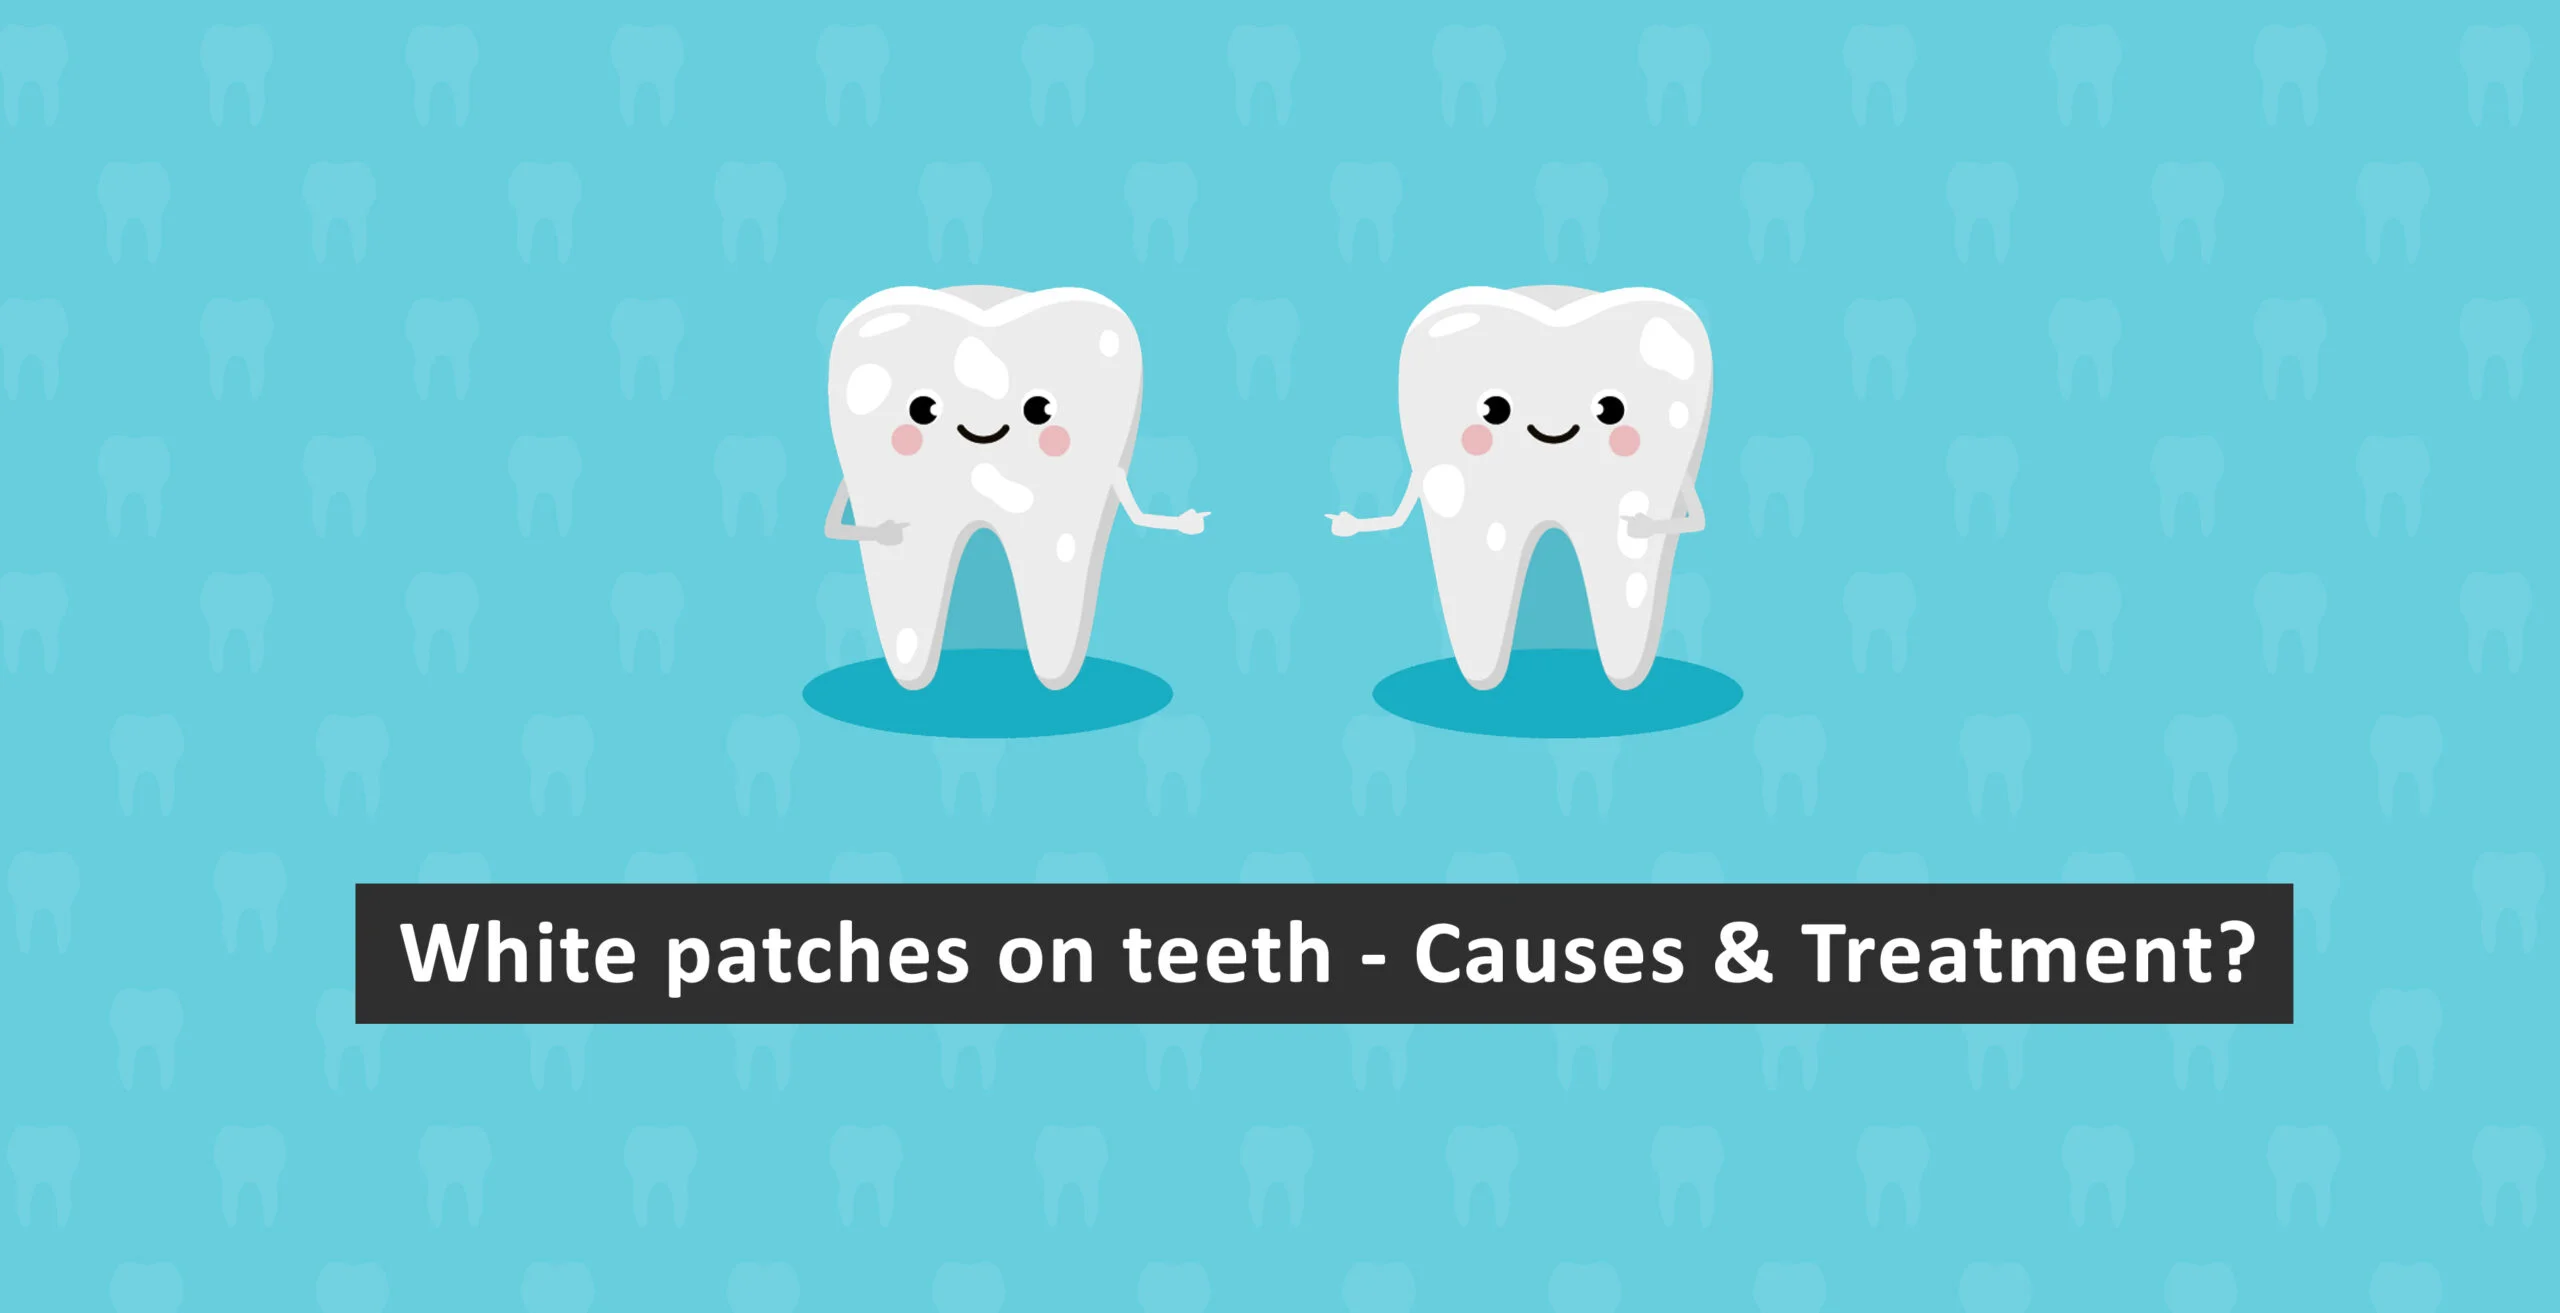 https://www.miracleshealth.com/assets/blog/assets/uploads/blog/White patches on teeth